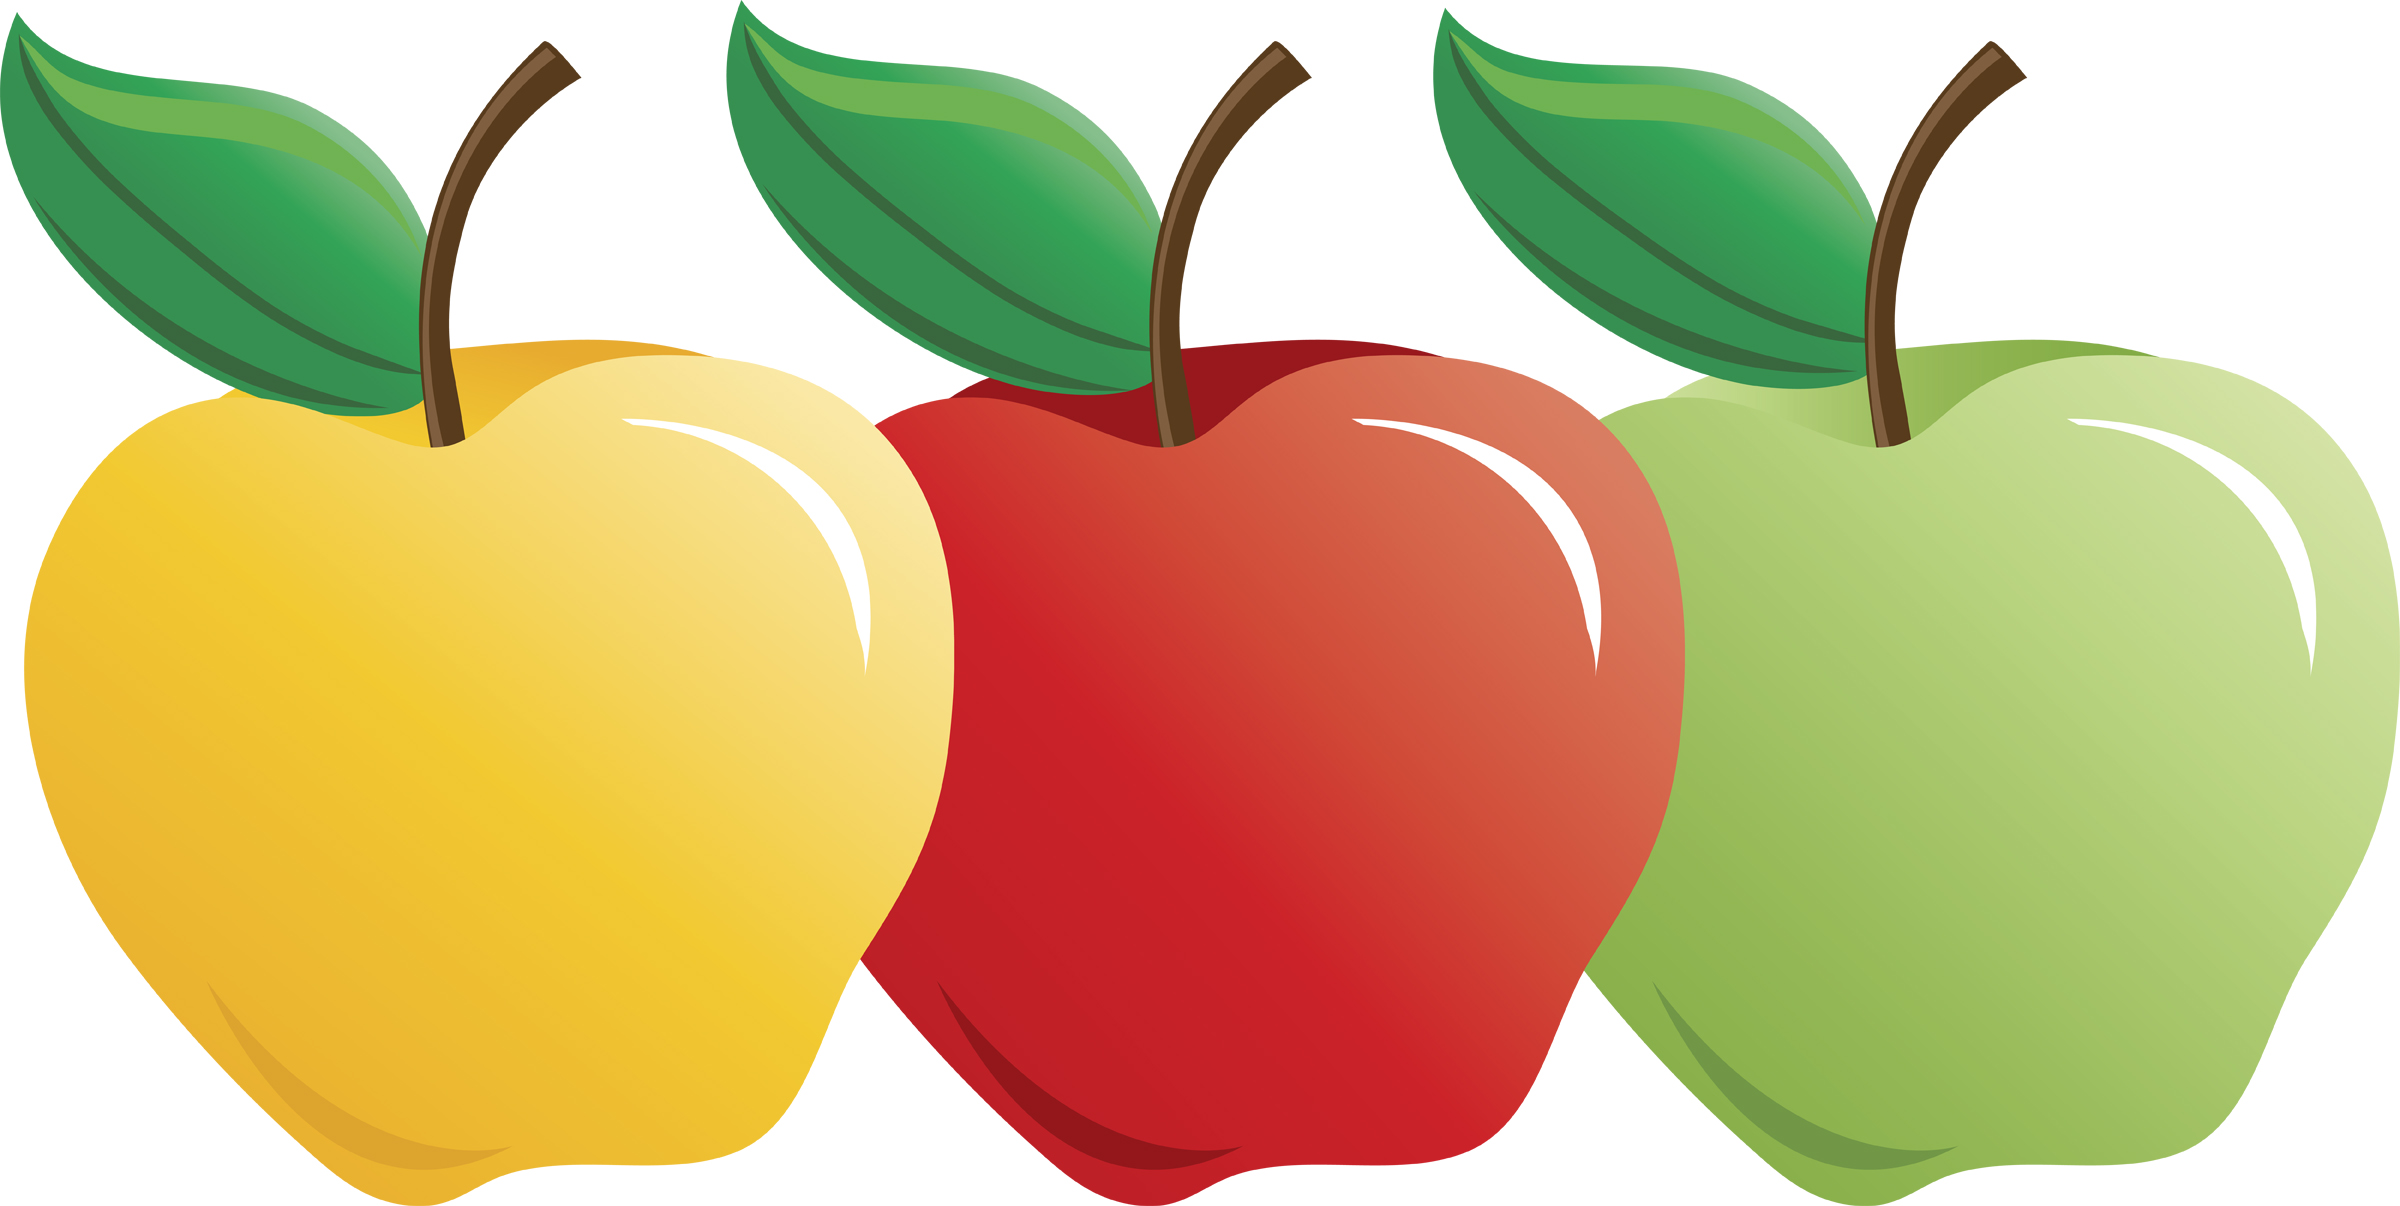 Clip art pictures of apples - .